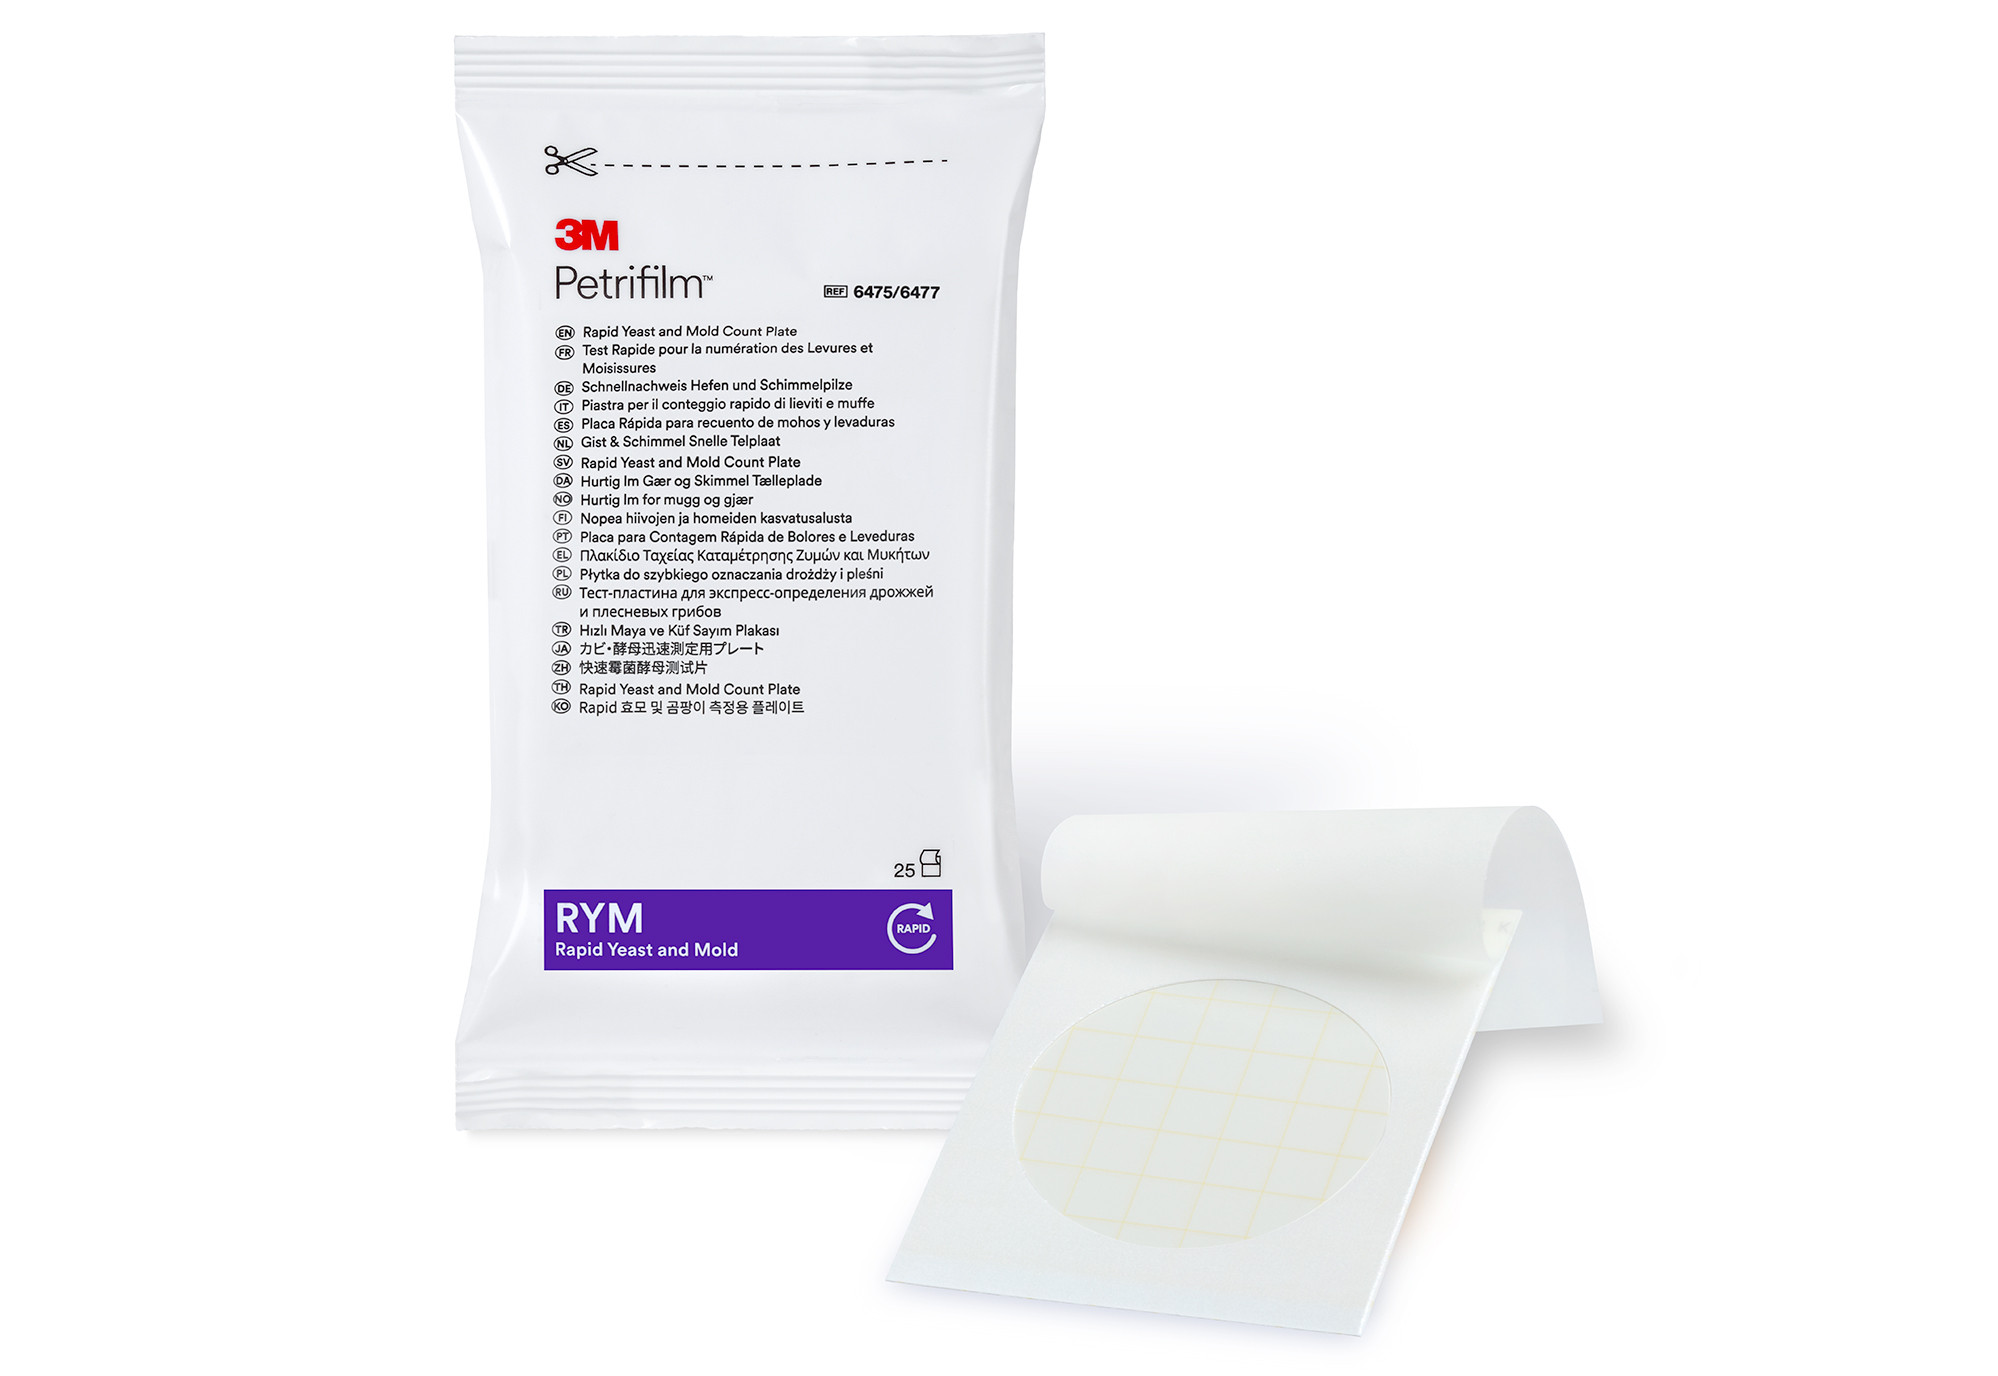 3M™ Petrifilm™ Rapid Yeast and Mold Count Plates